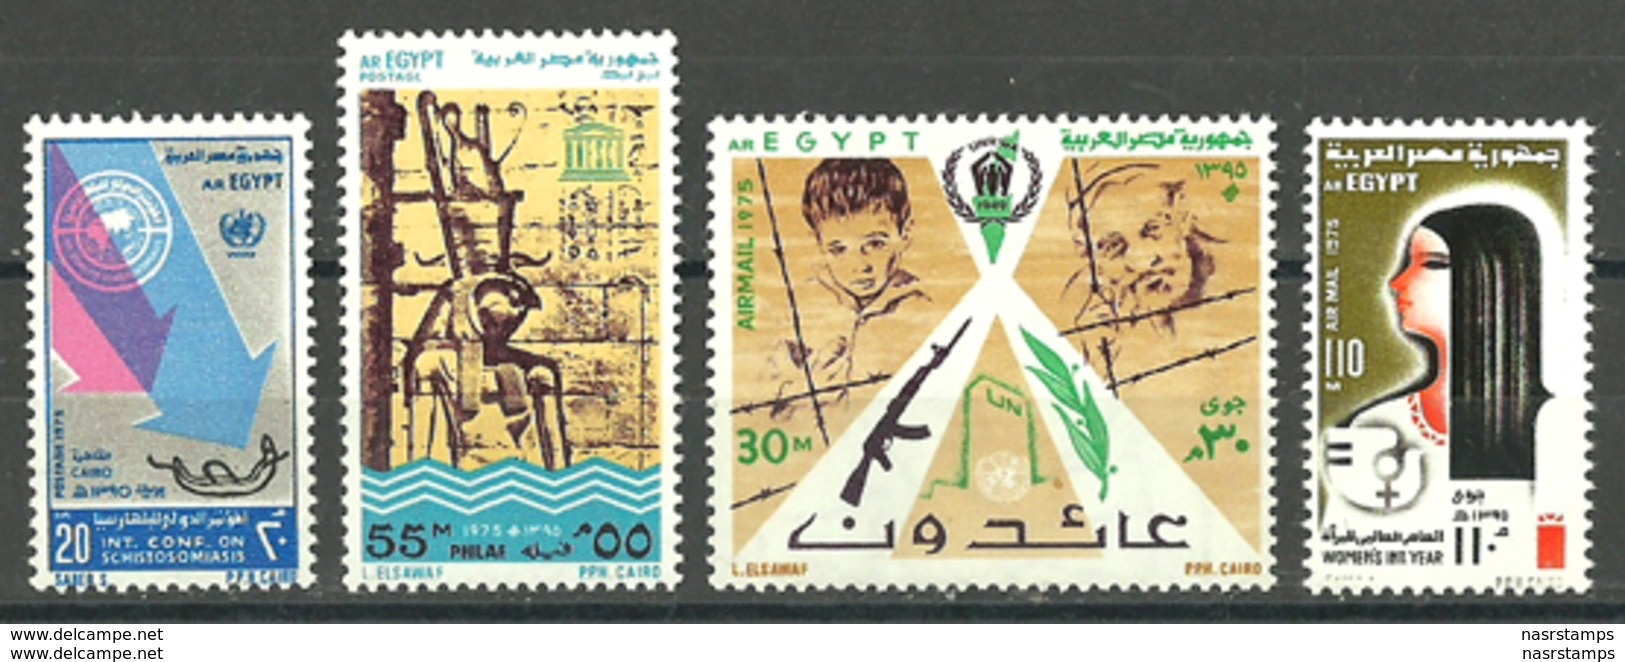 Egypt - 1975 - UN - UNESCO - ( United Nation Day - Temple Of Philae - Refugees - Schistosomiasis Conf. ) - MNH (**) - Egyptologie